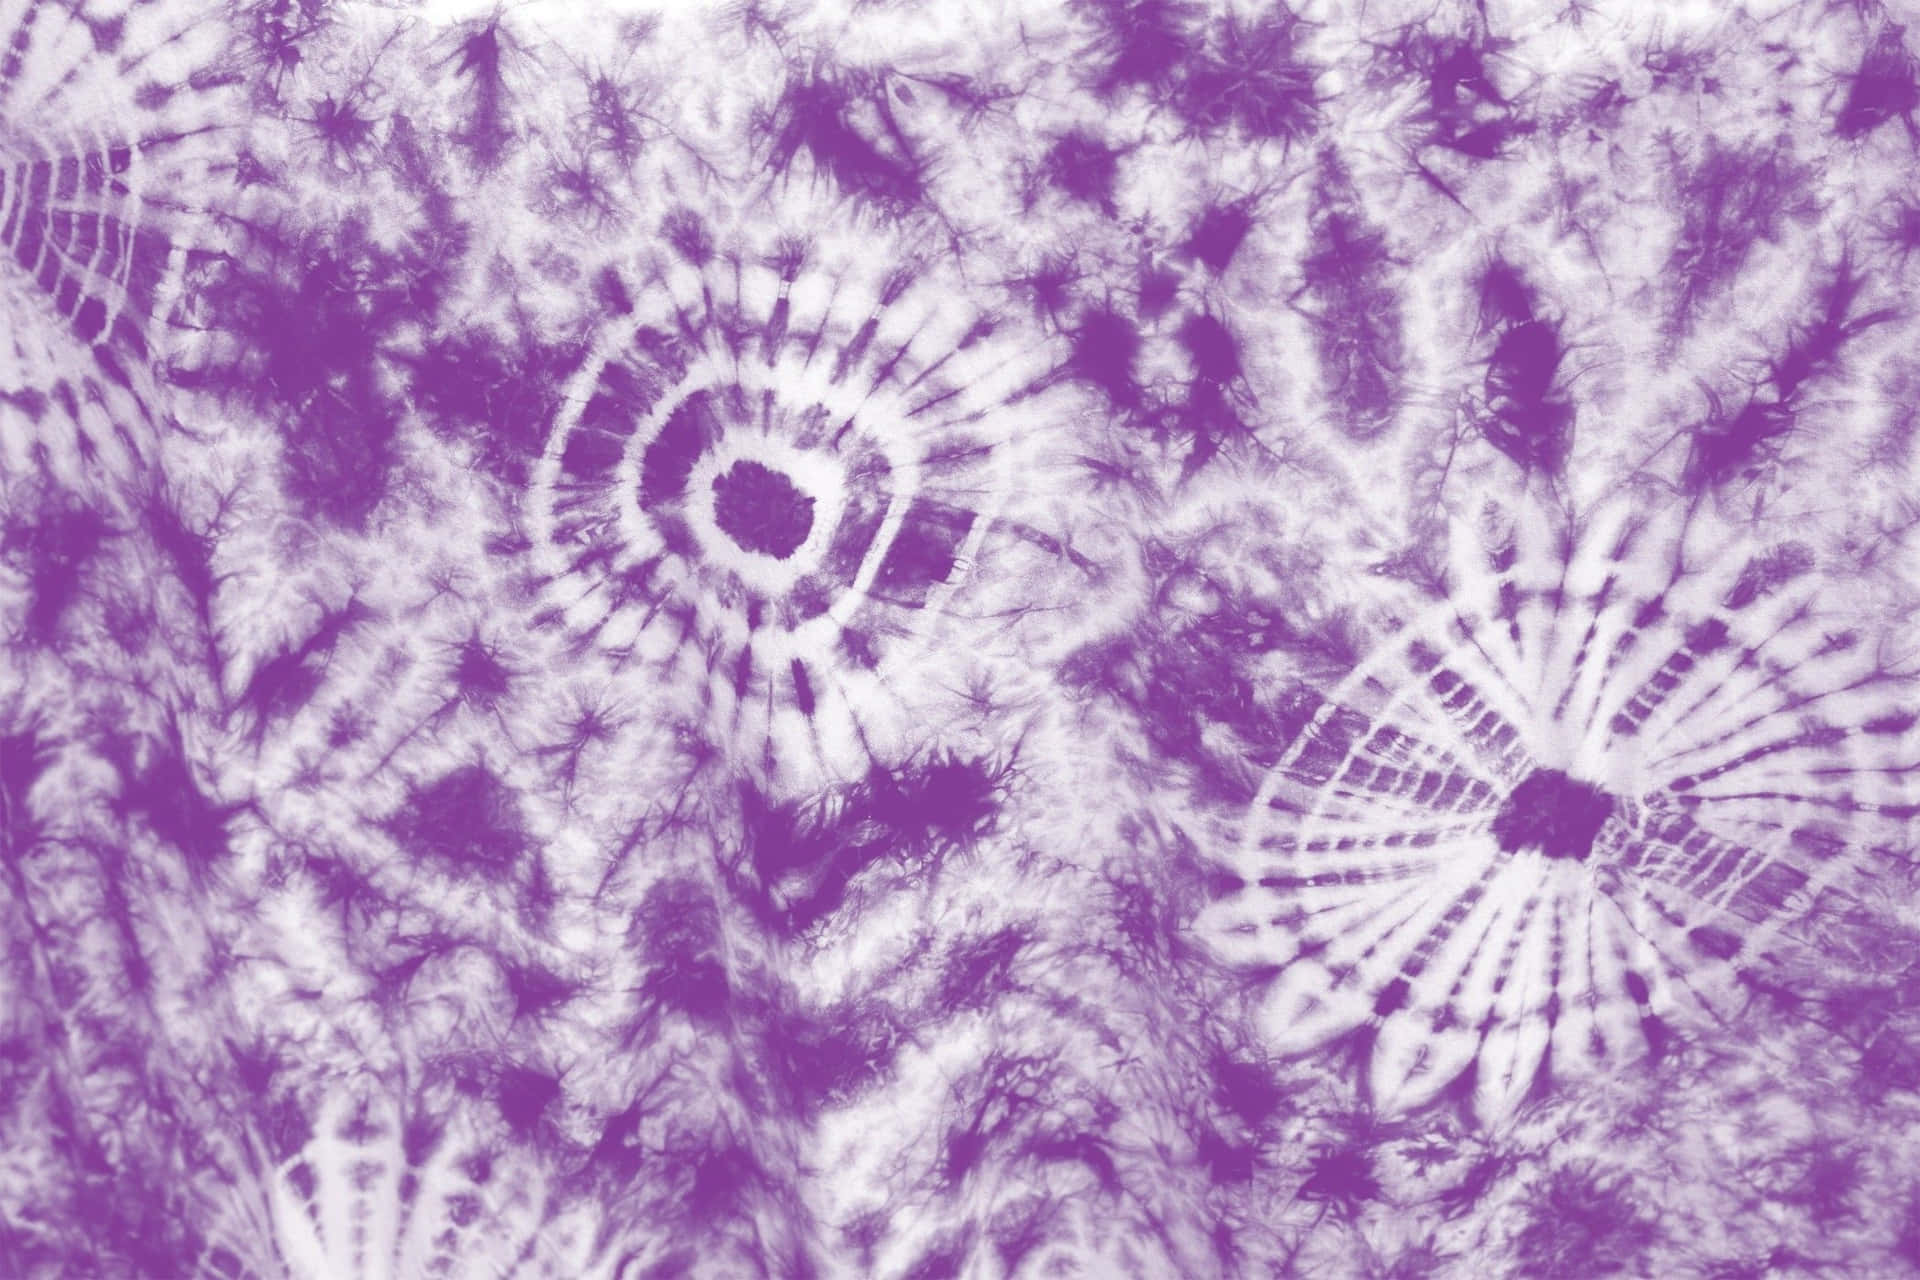 Rock an Out of This World Style with Purple Tie Dye Wallpaper